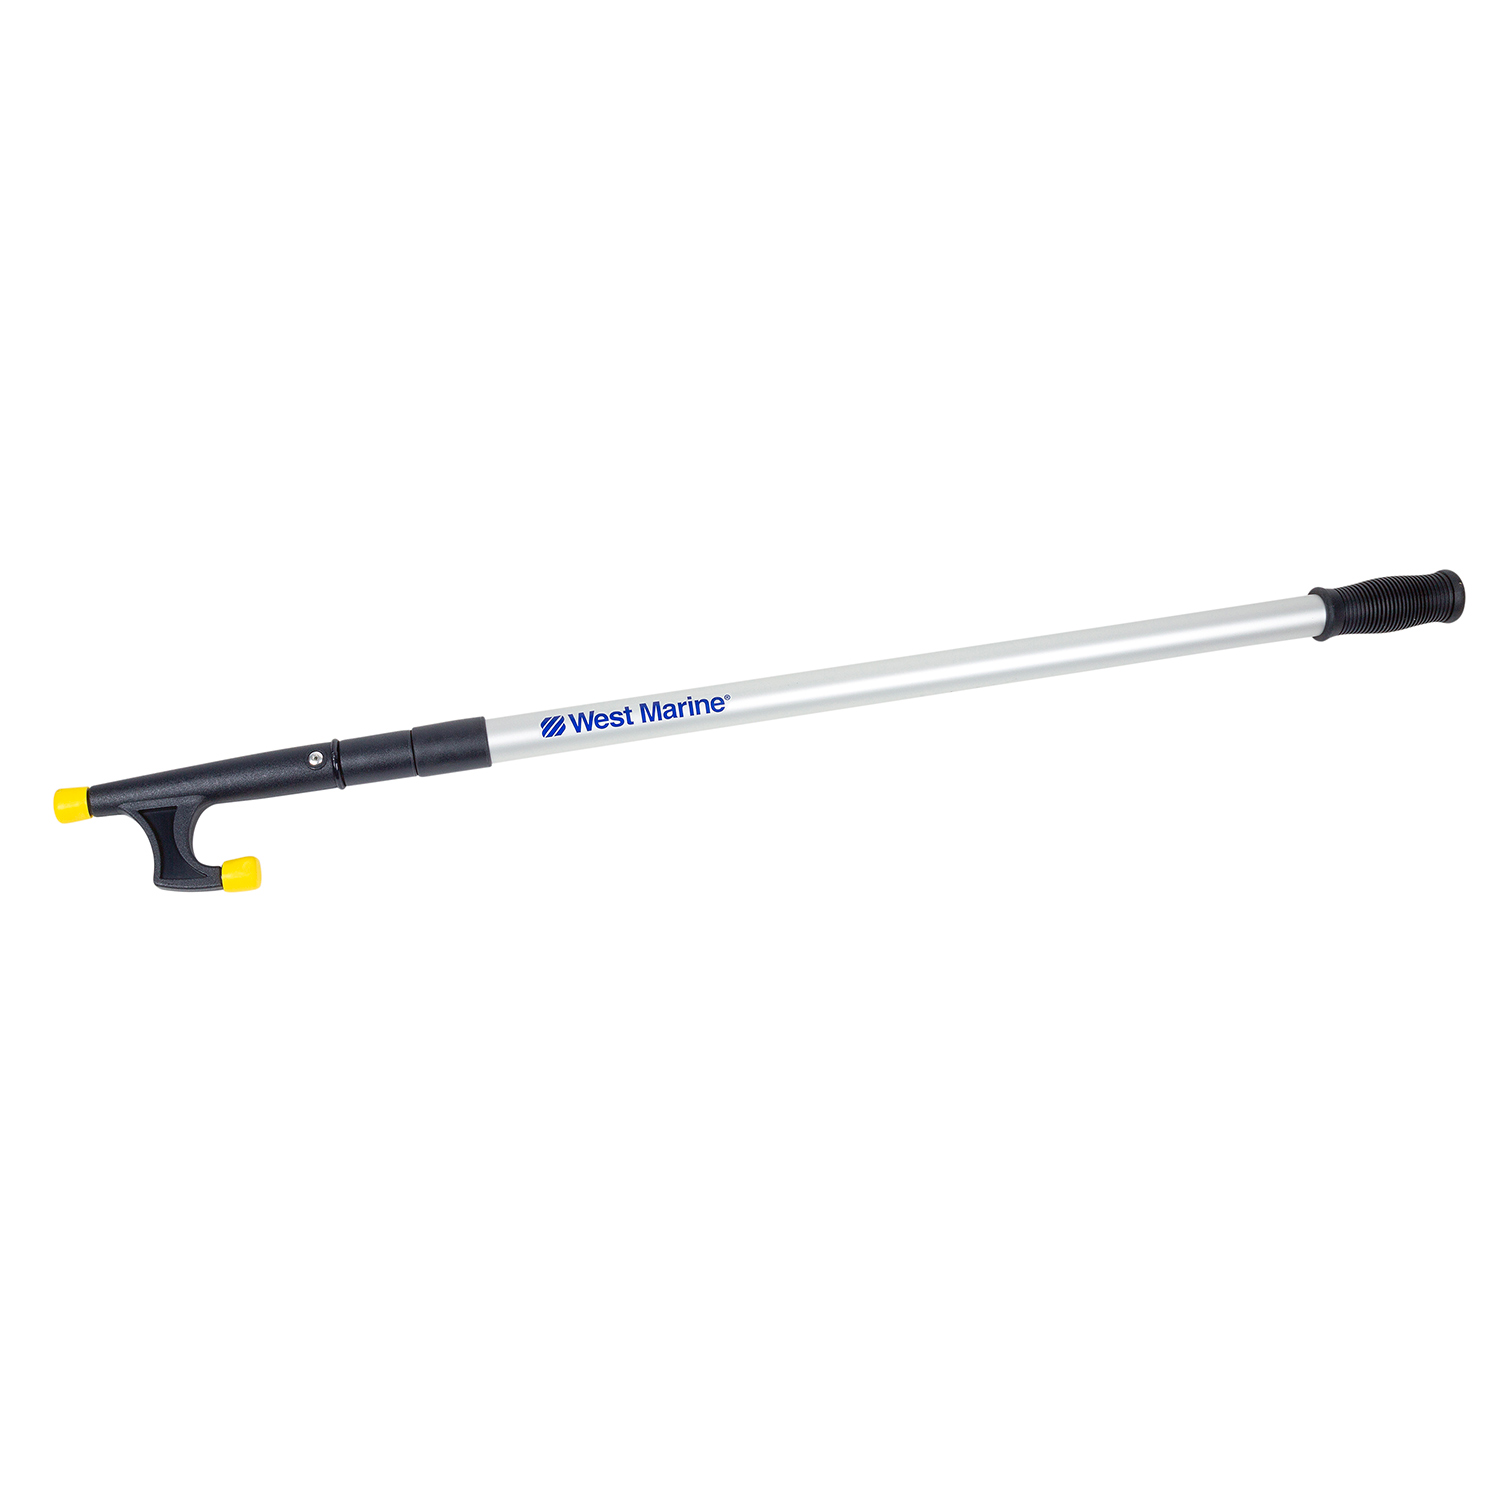 Boat Hook for Docking with Telescoping Extension Pole – Extend-A-Reach